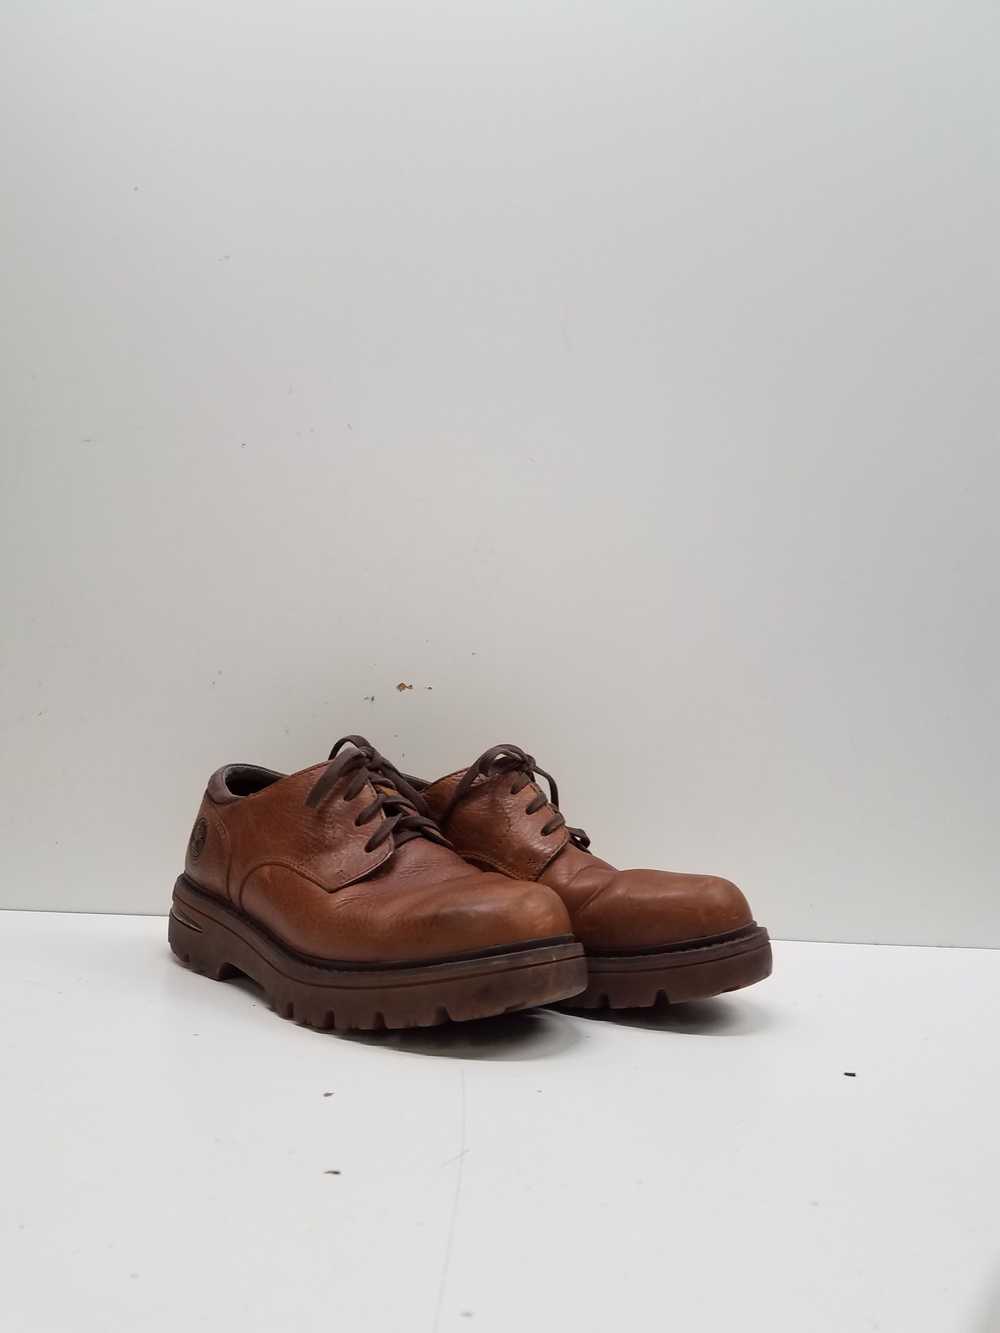 Timberland Brown Lace Up Men's Size 7.5M - image 3